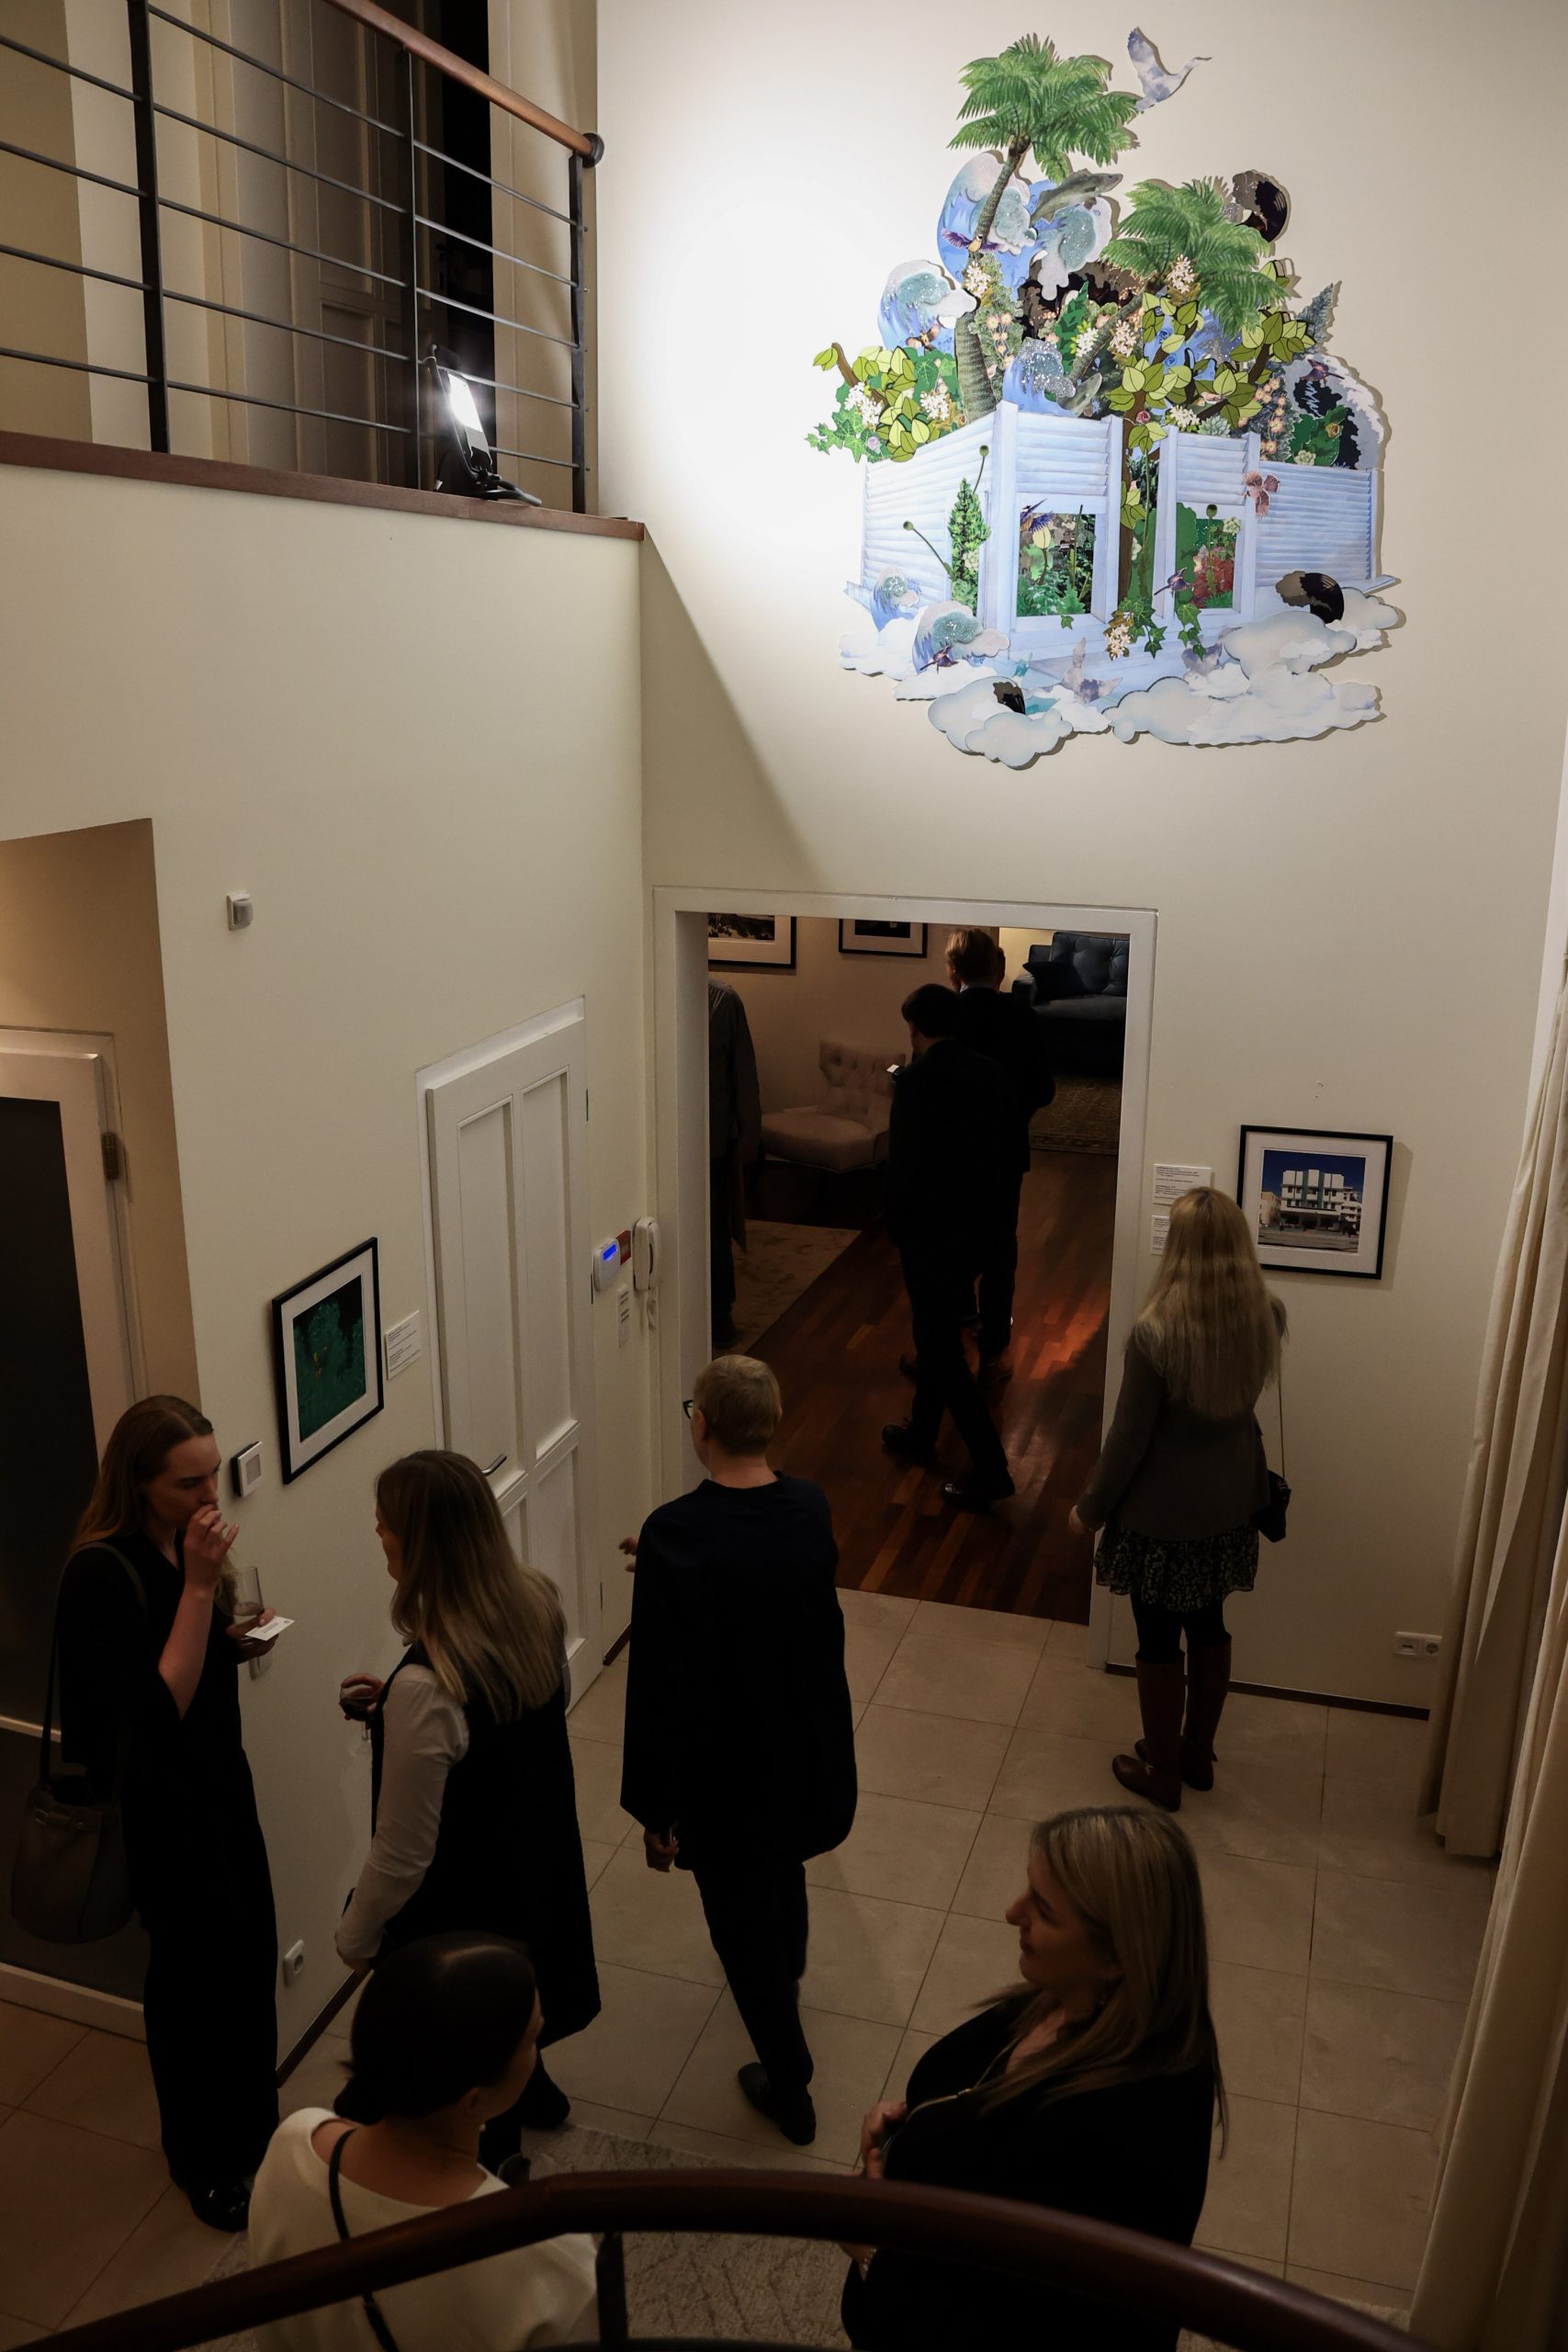 Charlton’s work In Climate and Culture (Compromise Series) was created specifically for the Art in Embassies exhibition in the Residence in Vilnius.